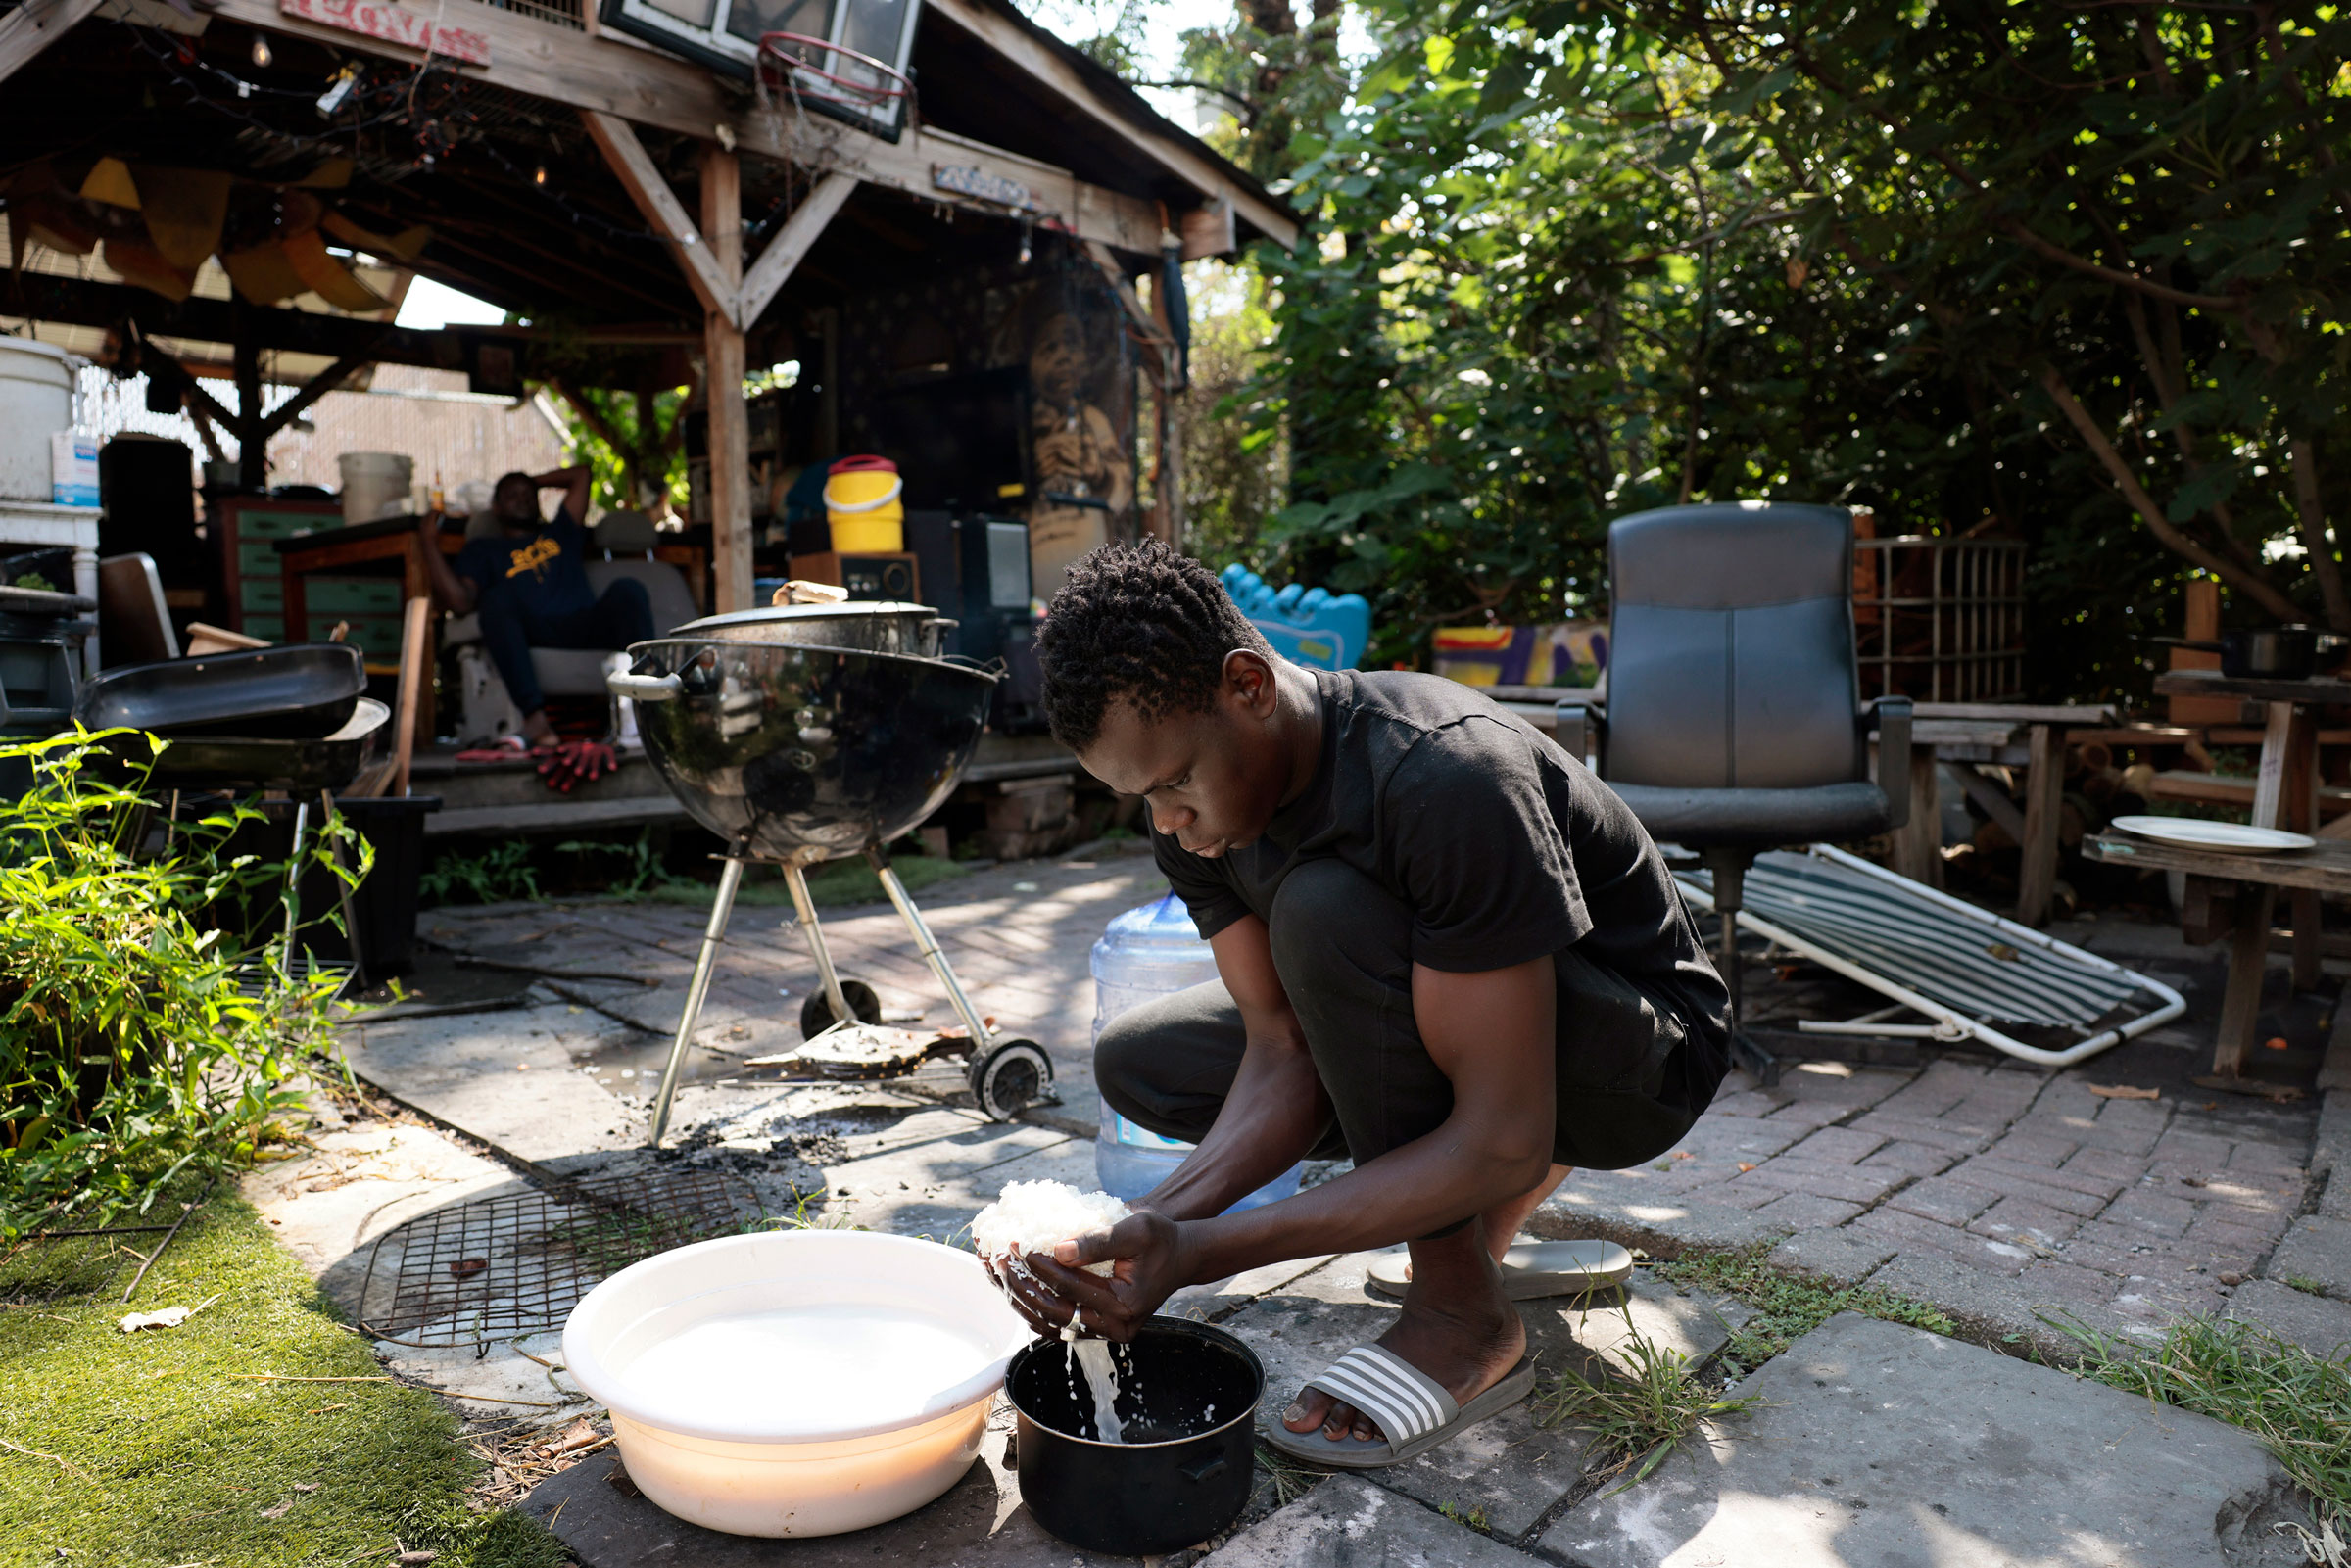 A migrant from Mauritania washes rice at Bushwick City Farm